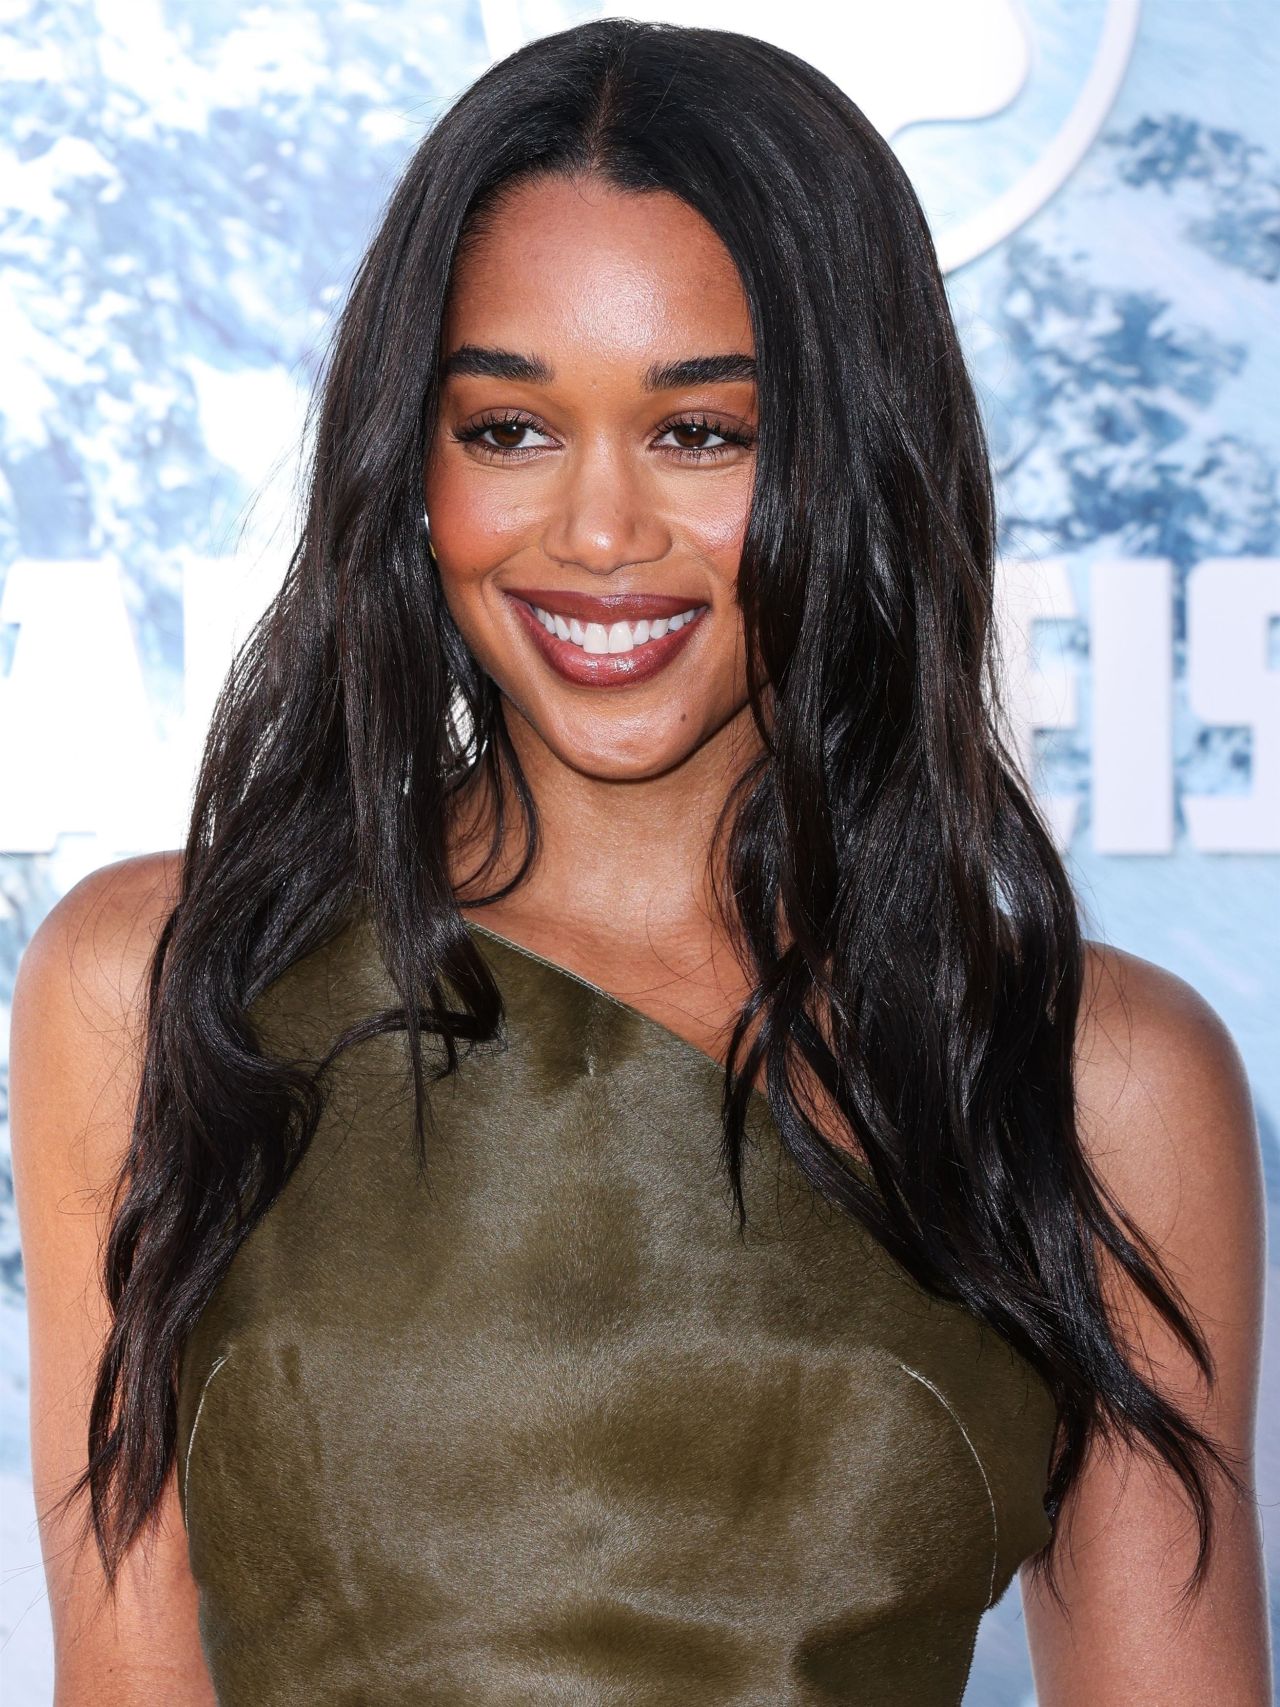 LAURA HARRIER AT MONTBLANC EVENT CELEBRATING THE 100 YEAR OF THE MEISERSTUCK PEN03